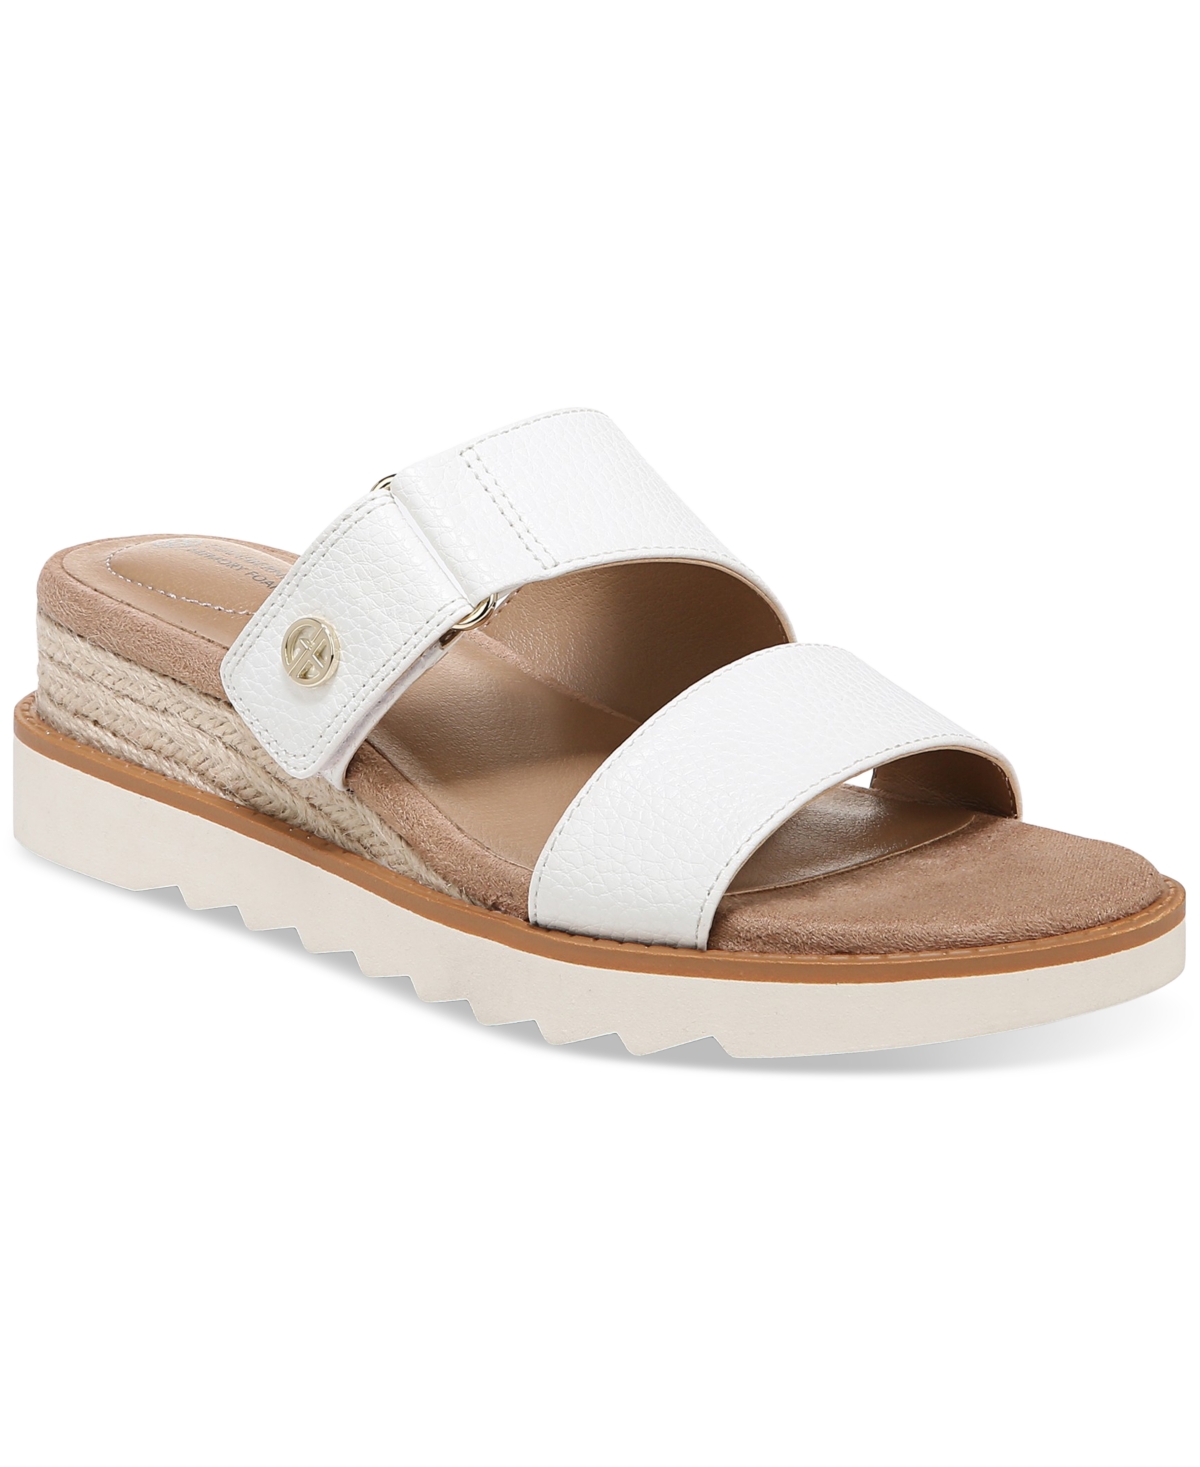 Women's Bryerr Memory Foam Double Band Wedge Sandals, Created for Macy's - Ivory